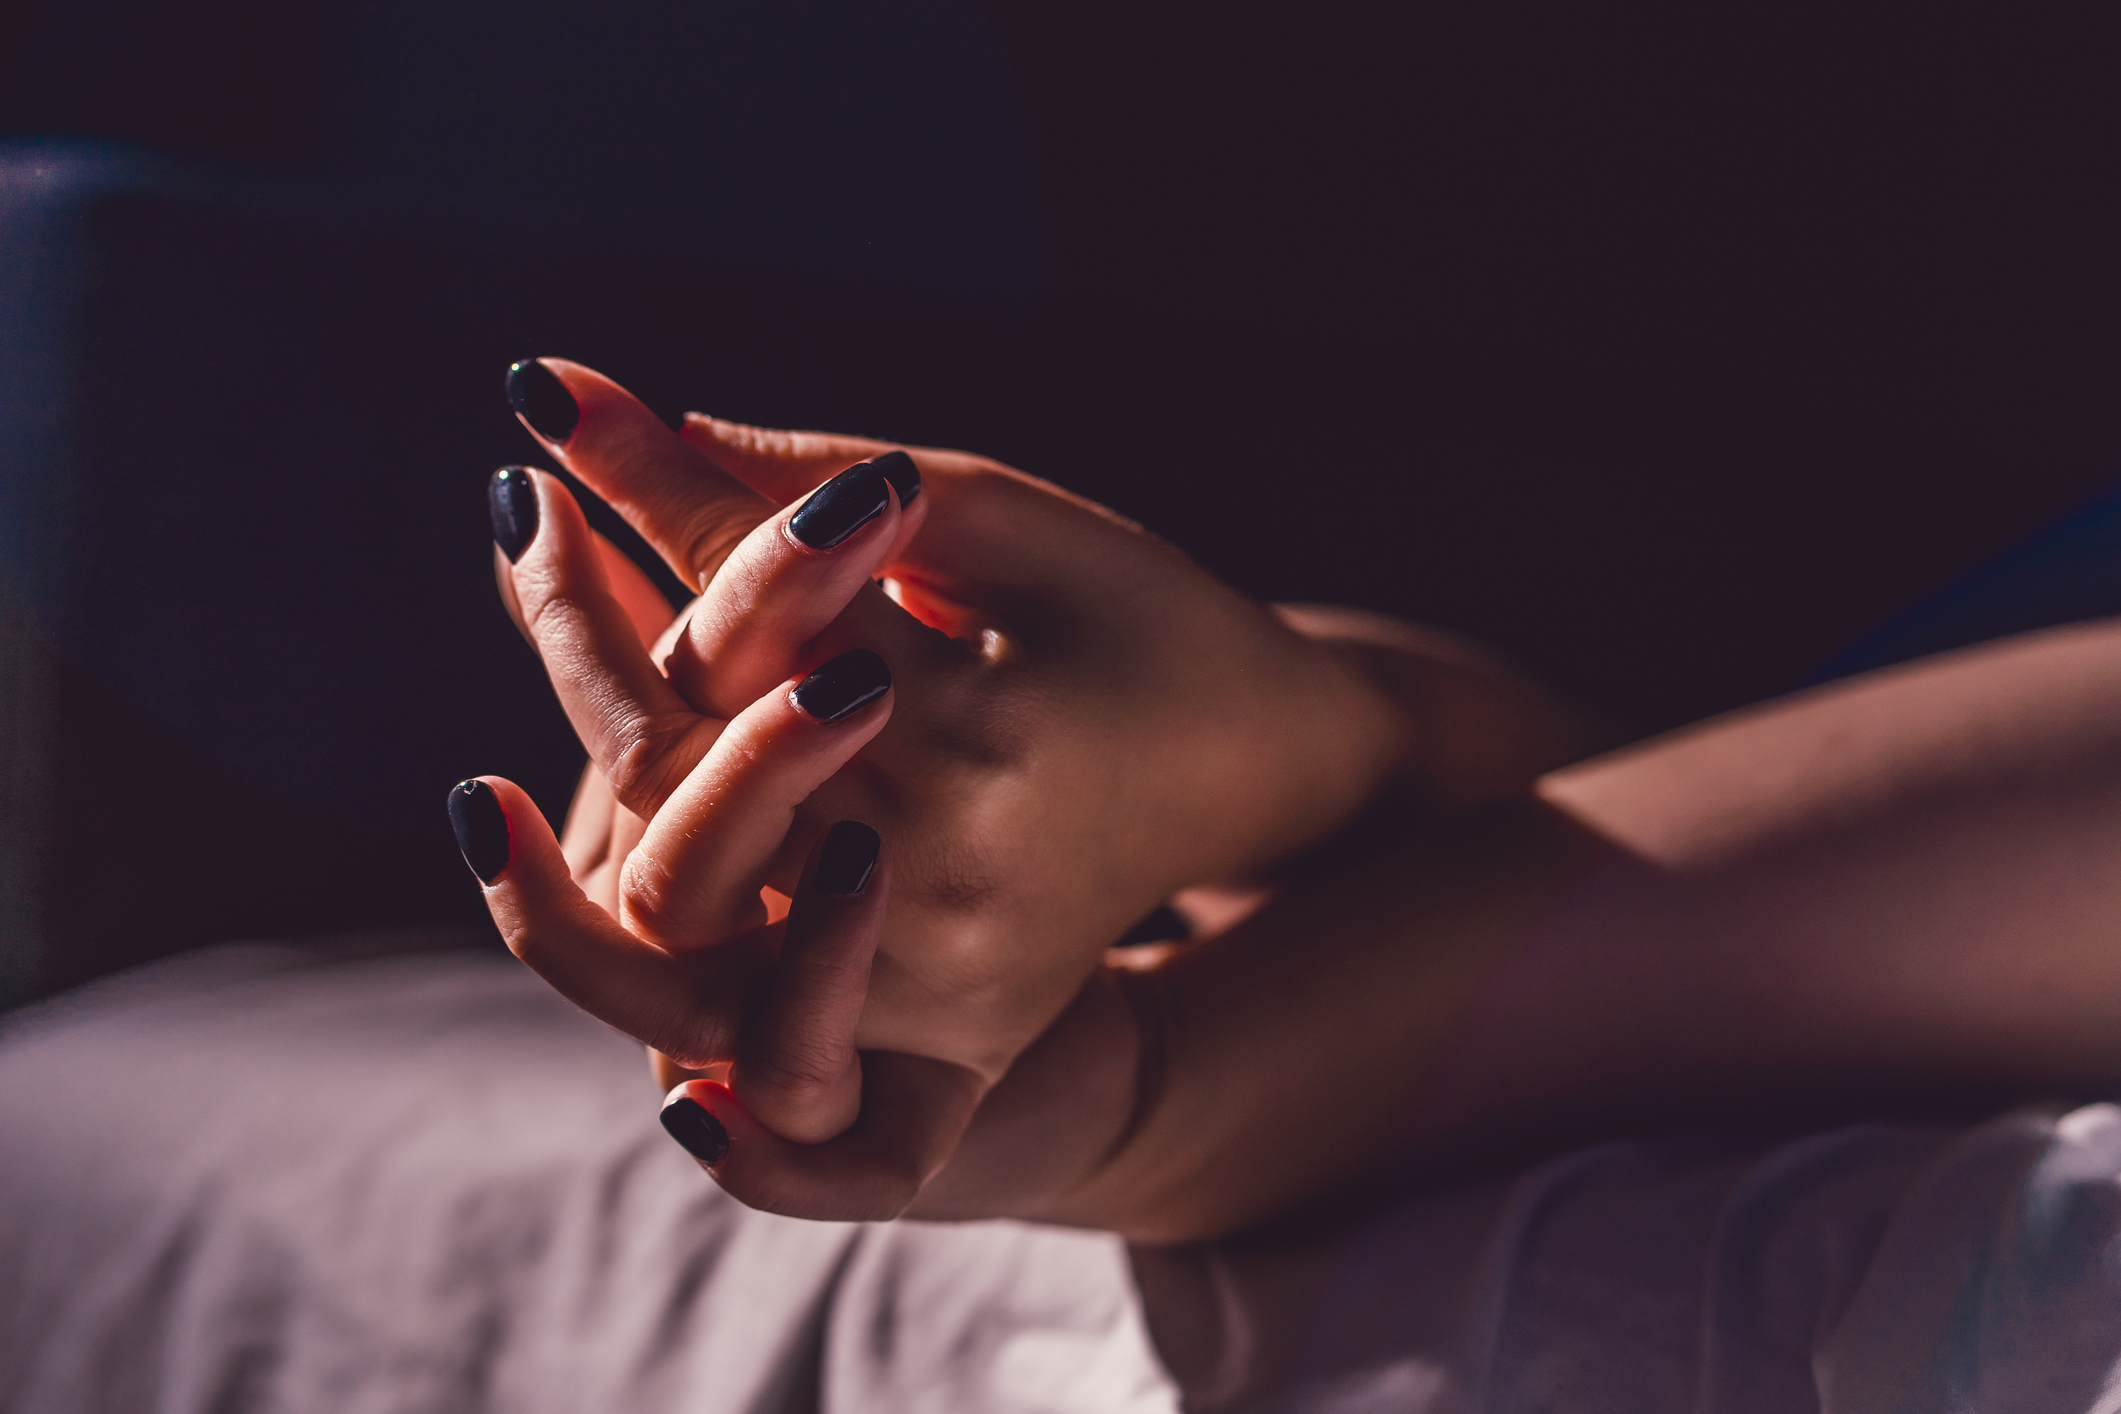 Close up on female young woman's girl's beautiful hands with black nail polish in dark room holding crossed fingers on the bed sheet.